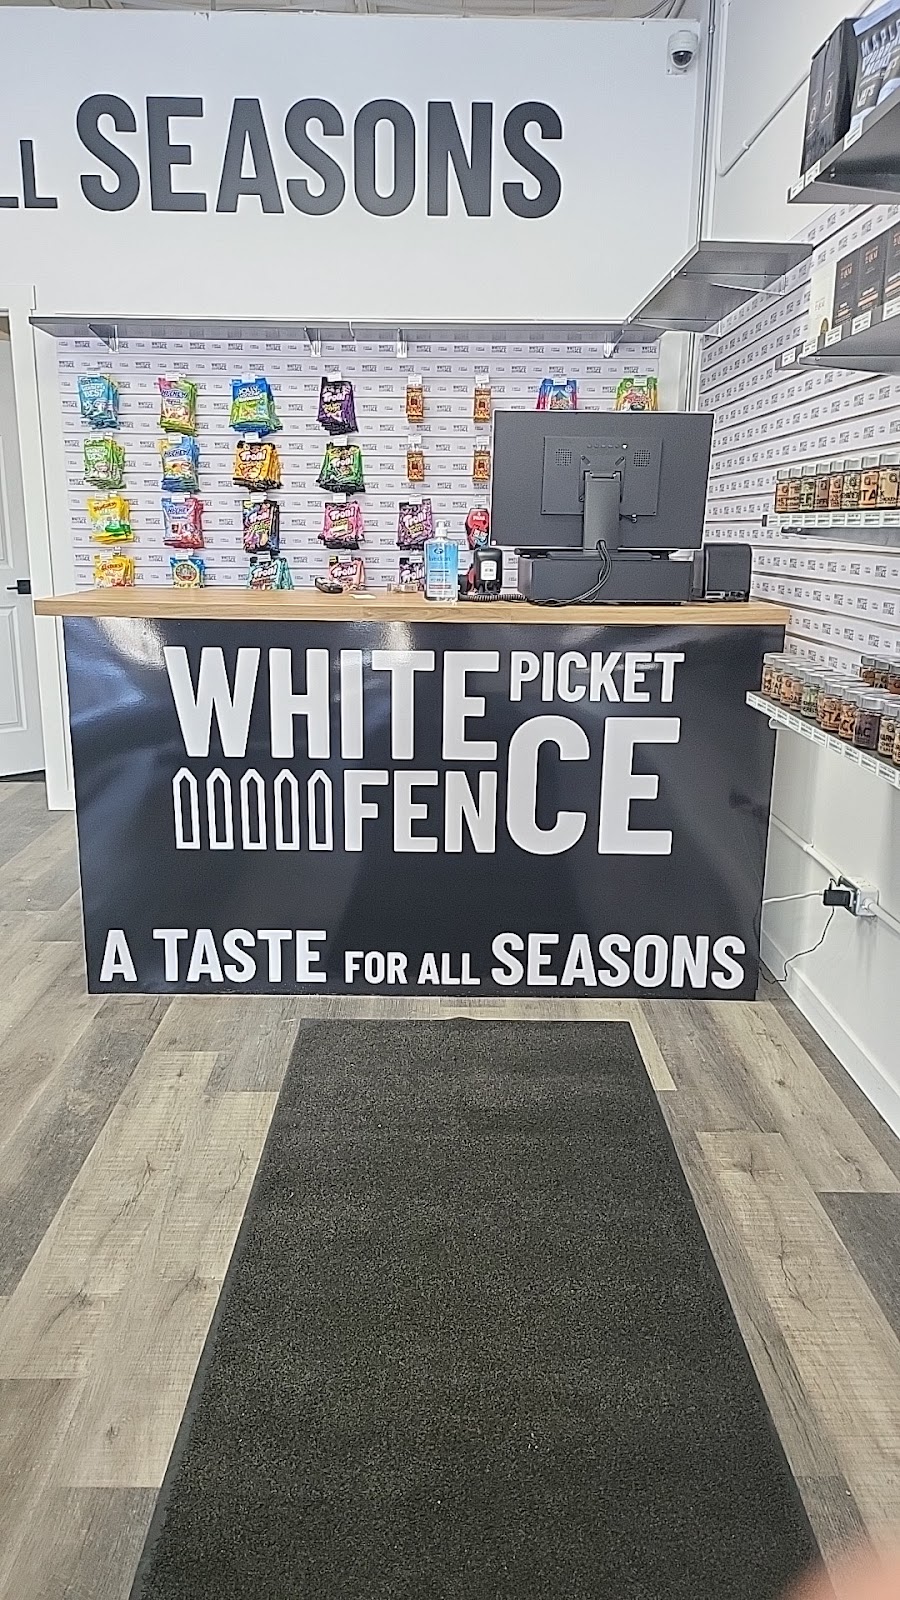 White Picket Fence | convenience store | 775 Henderson Hwy #3, Winnipeg, MB R2K 2K9, Canada | 2046694177 OR +1 204-669-4177